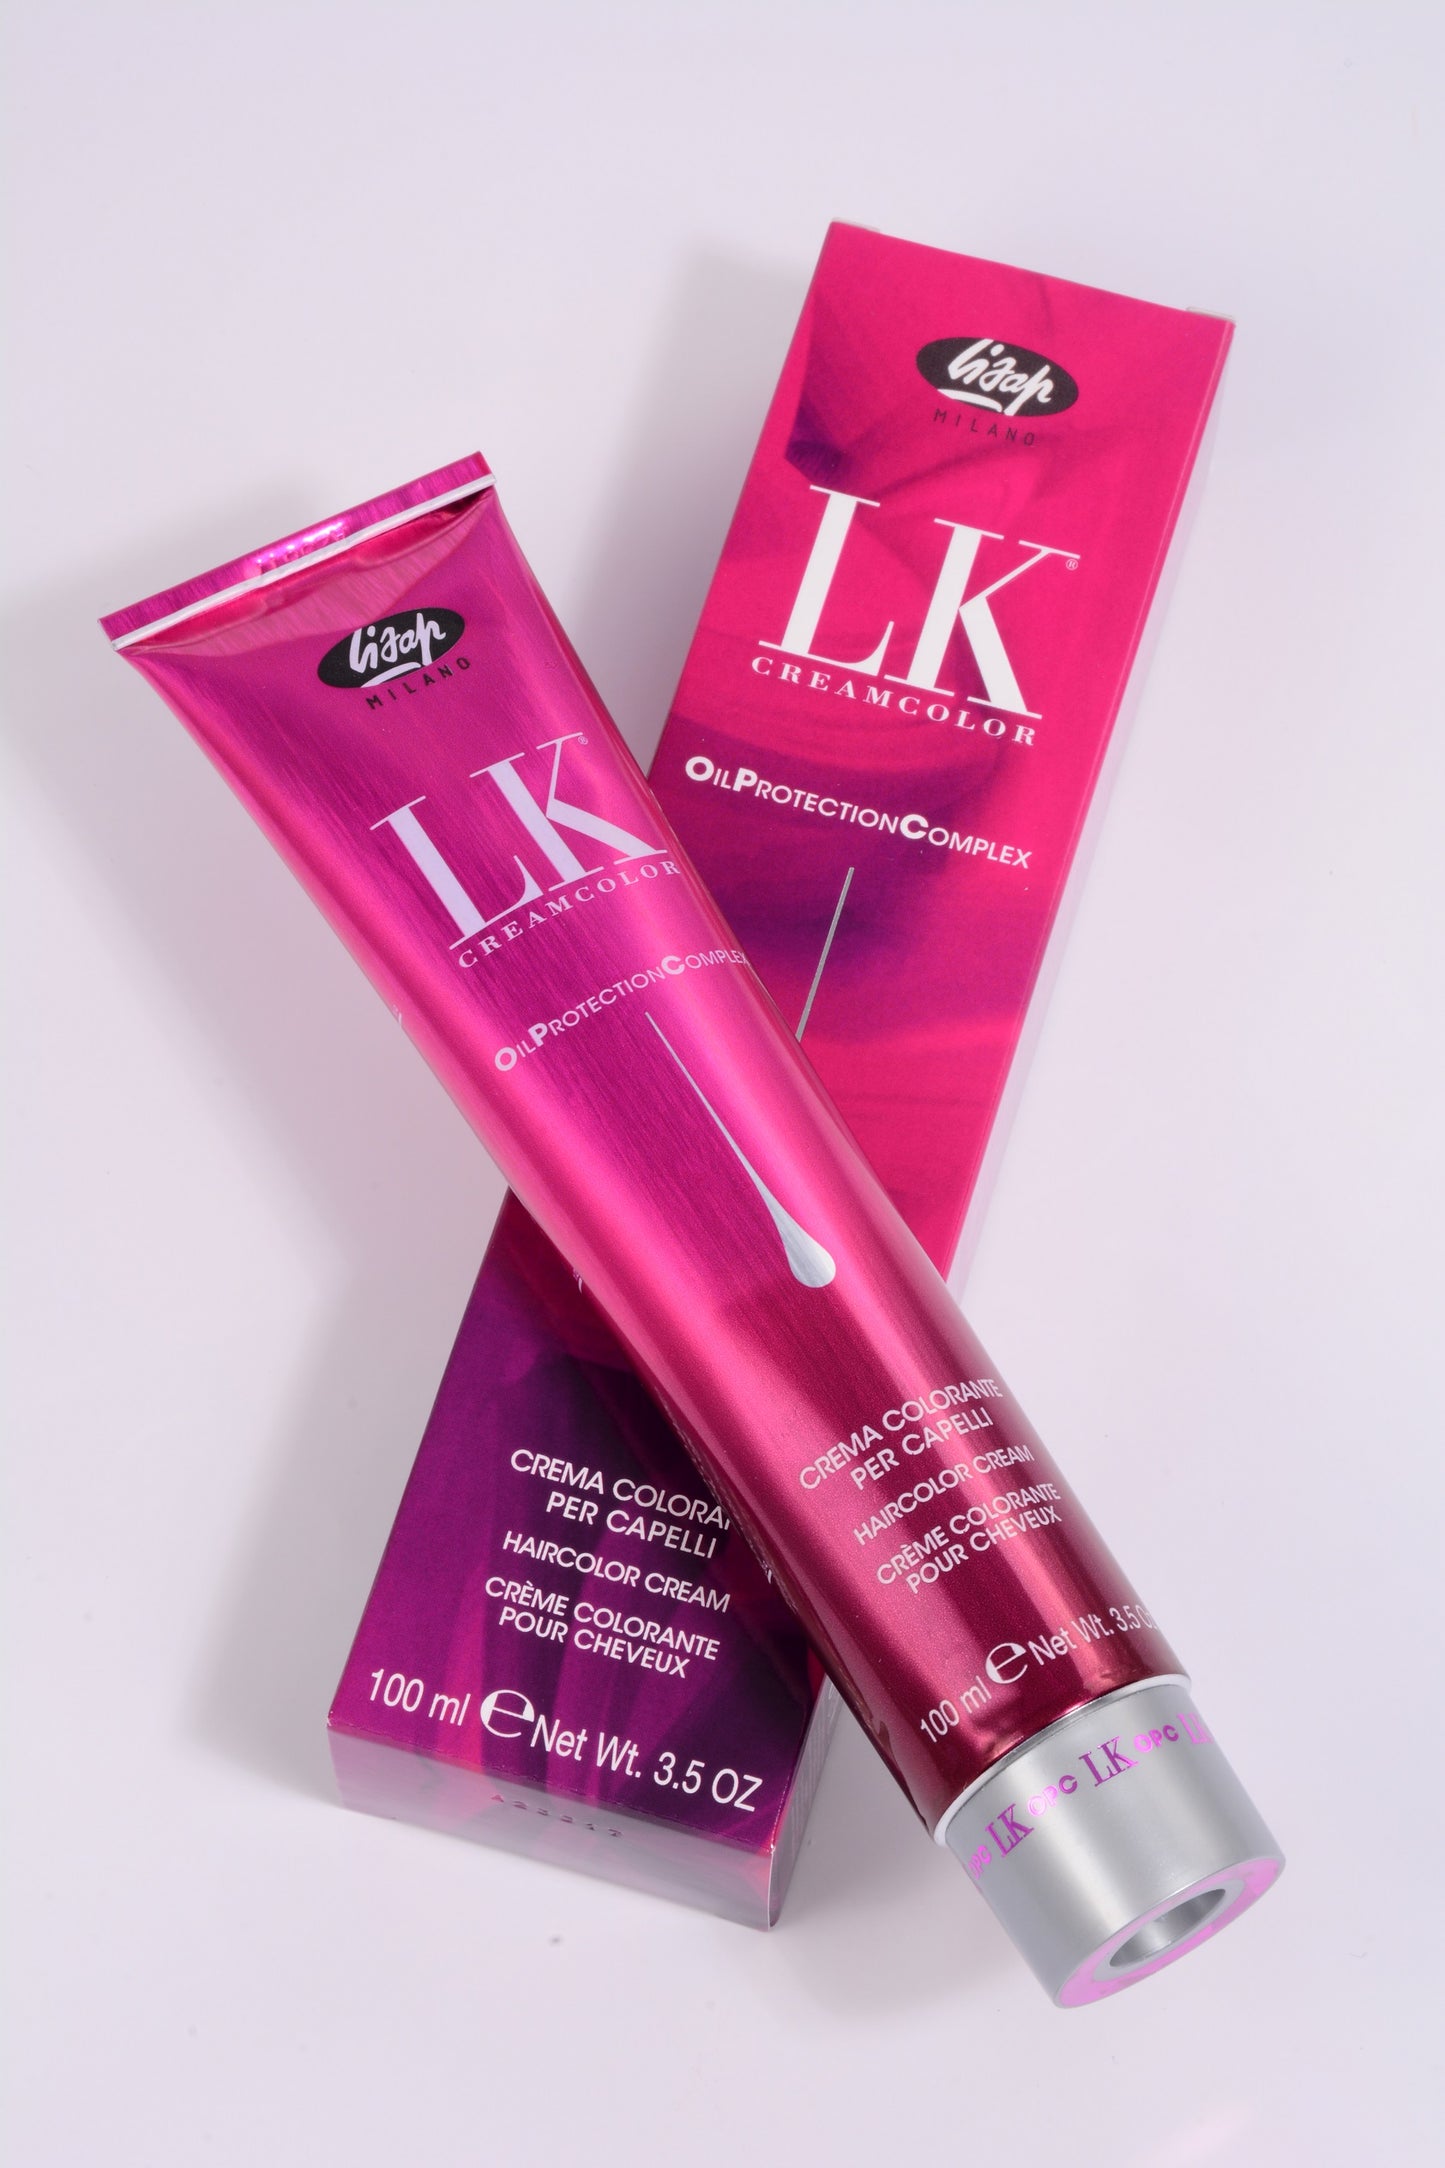 LK Creamcolor 9/07 Oil Protection Complex